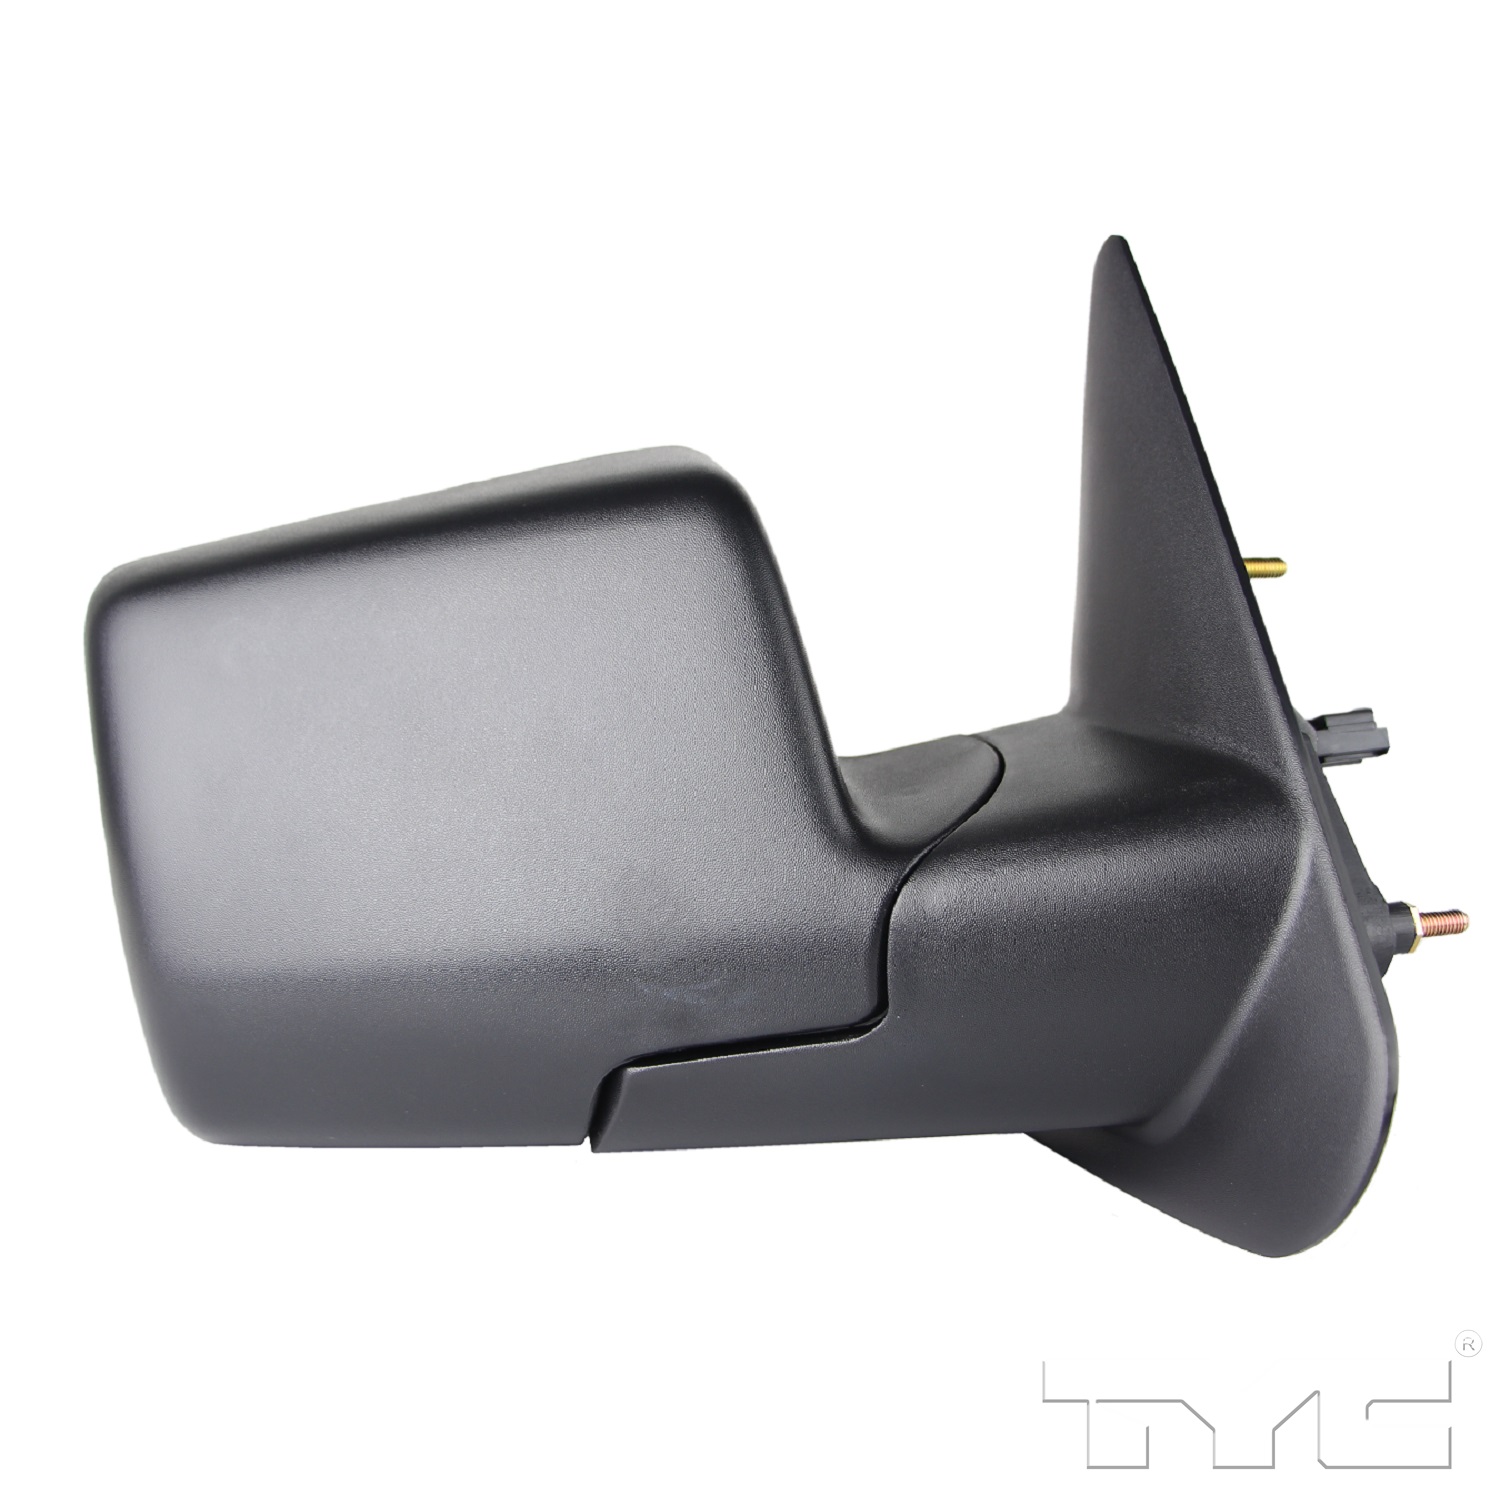 Aftermarket MIRRORS for MAZDA - B2300, B2300,06-07,RT Mirror outside rear view